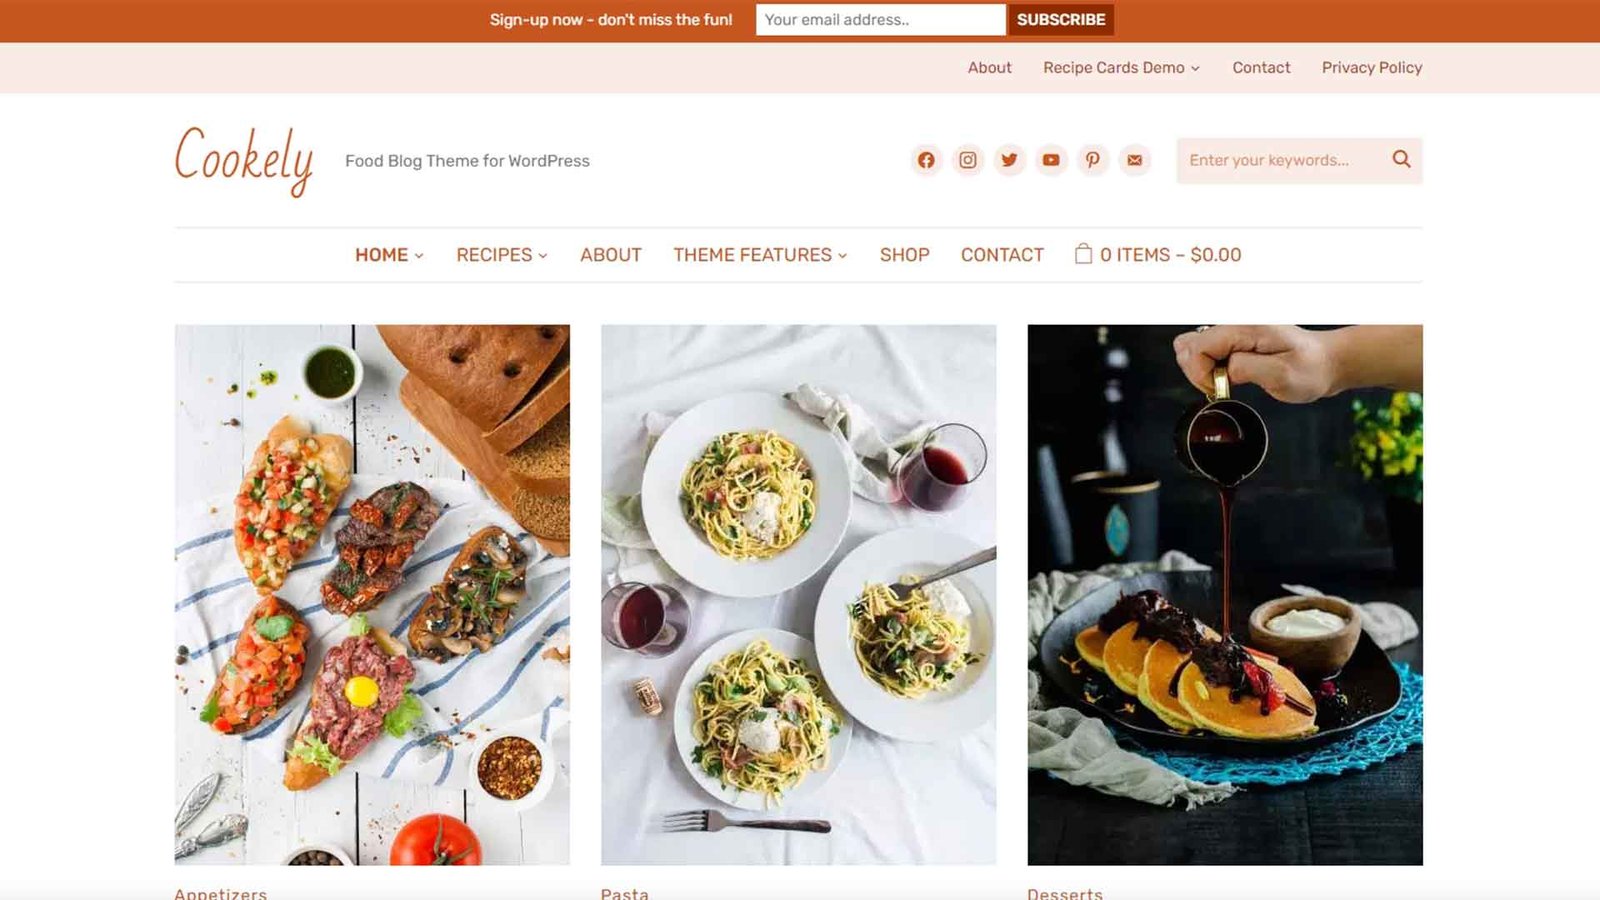 Best WordPress Themes for Food Blogs